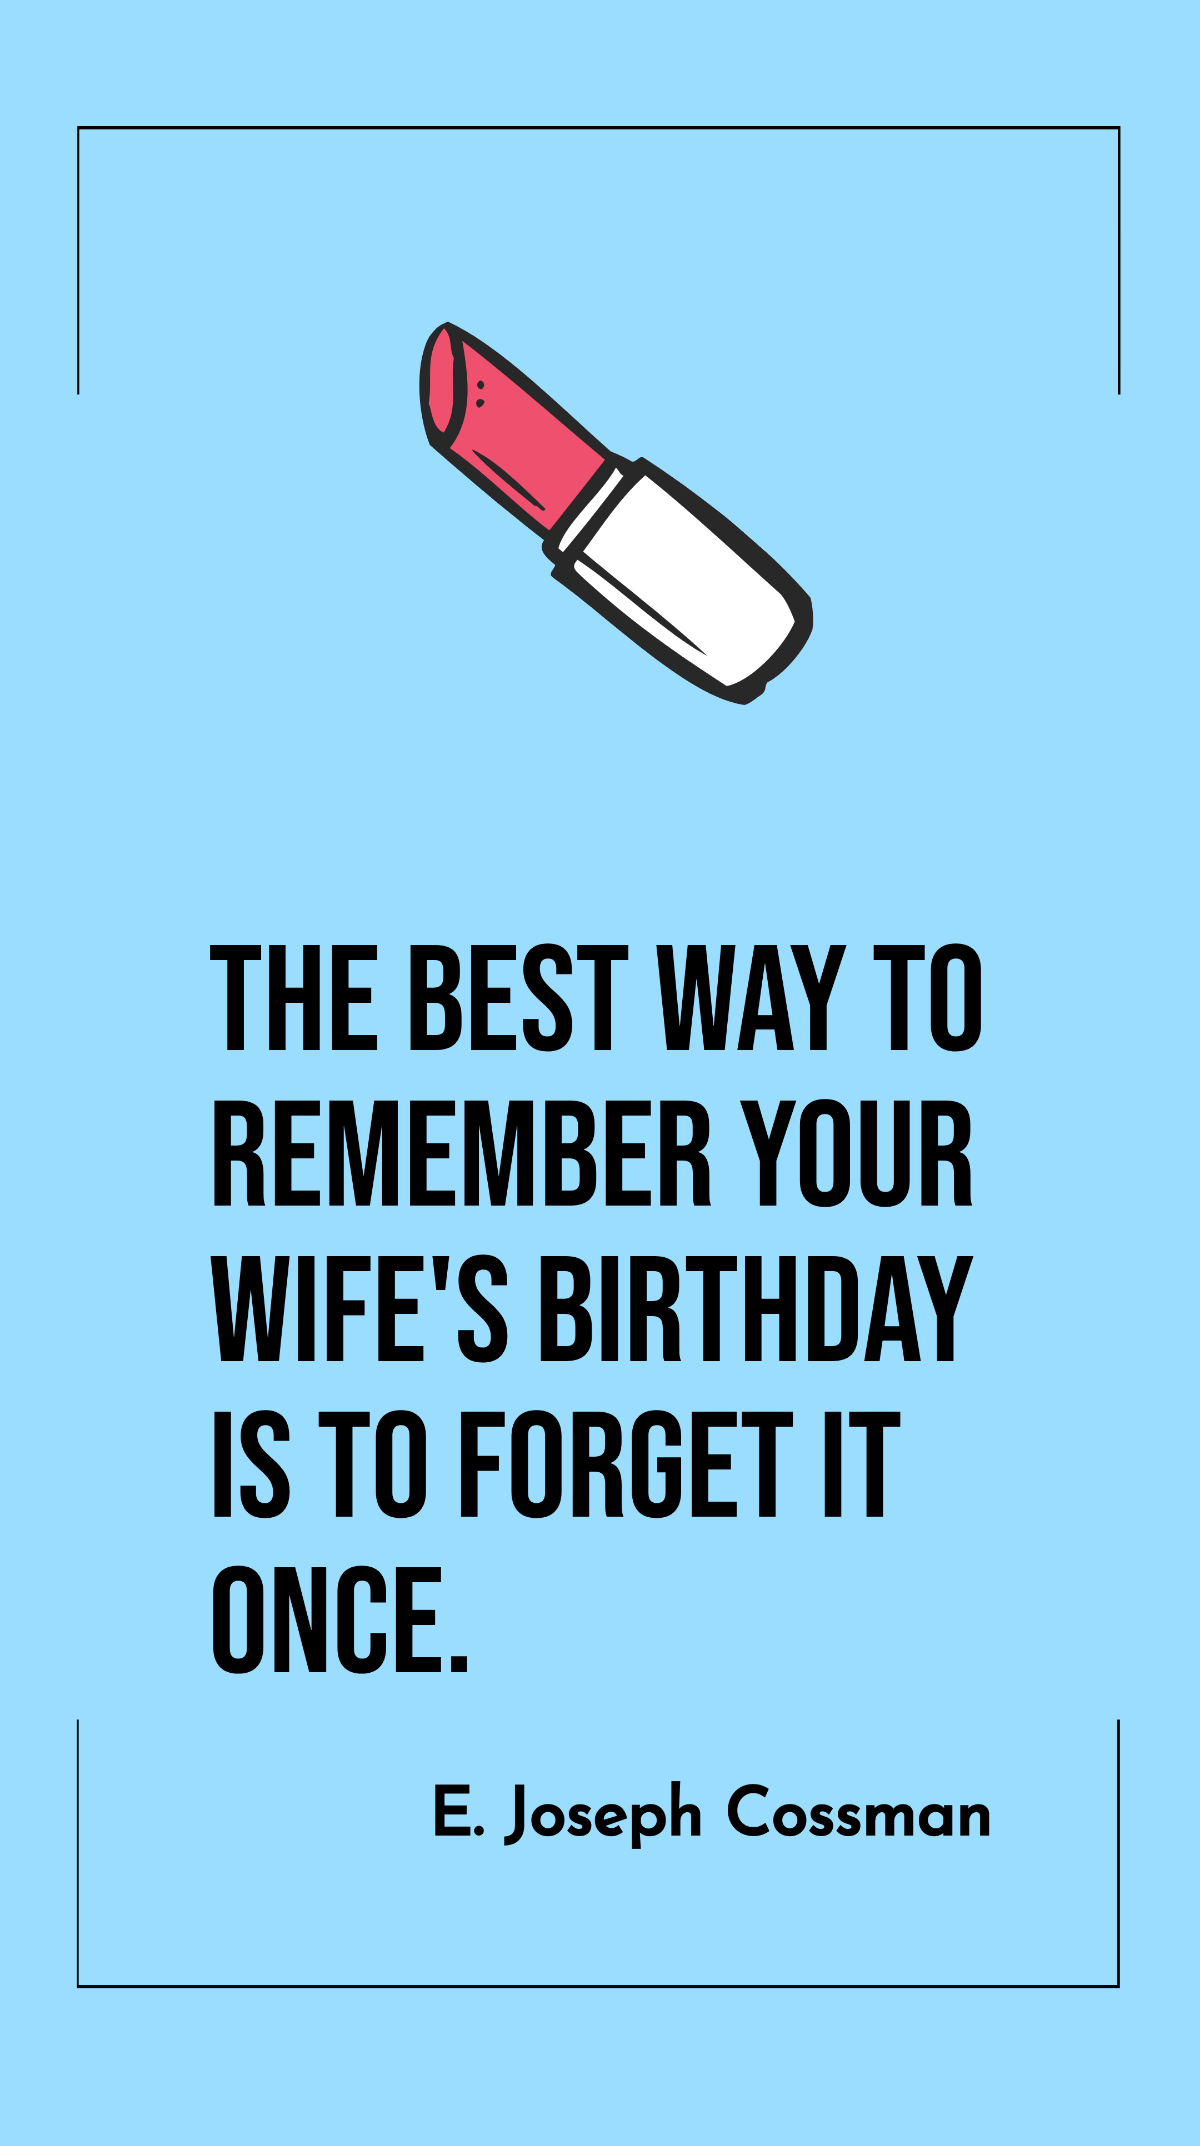 E. Joseph Cossman - The best way to remember your wife's birthday is to forget it once. Template